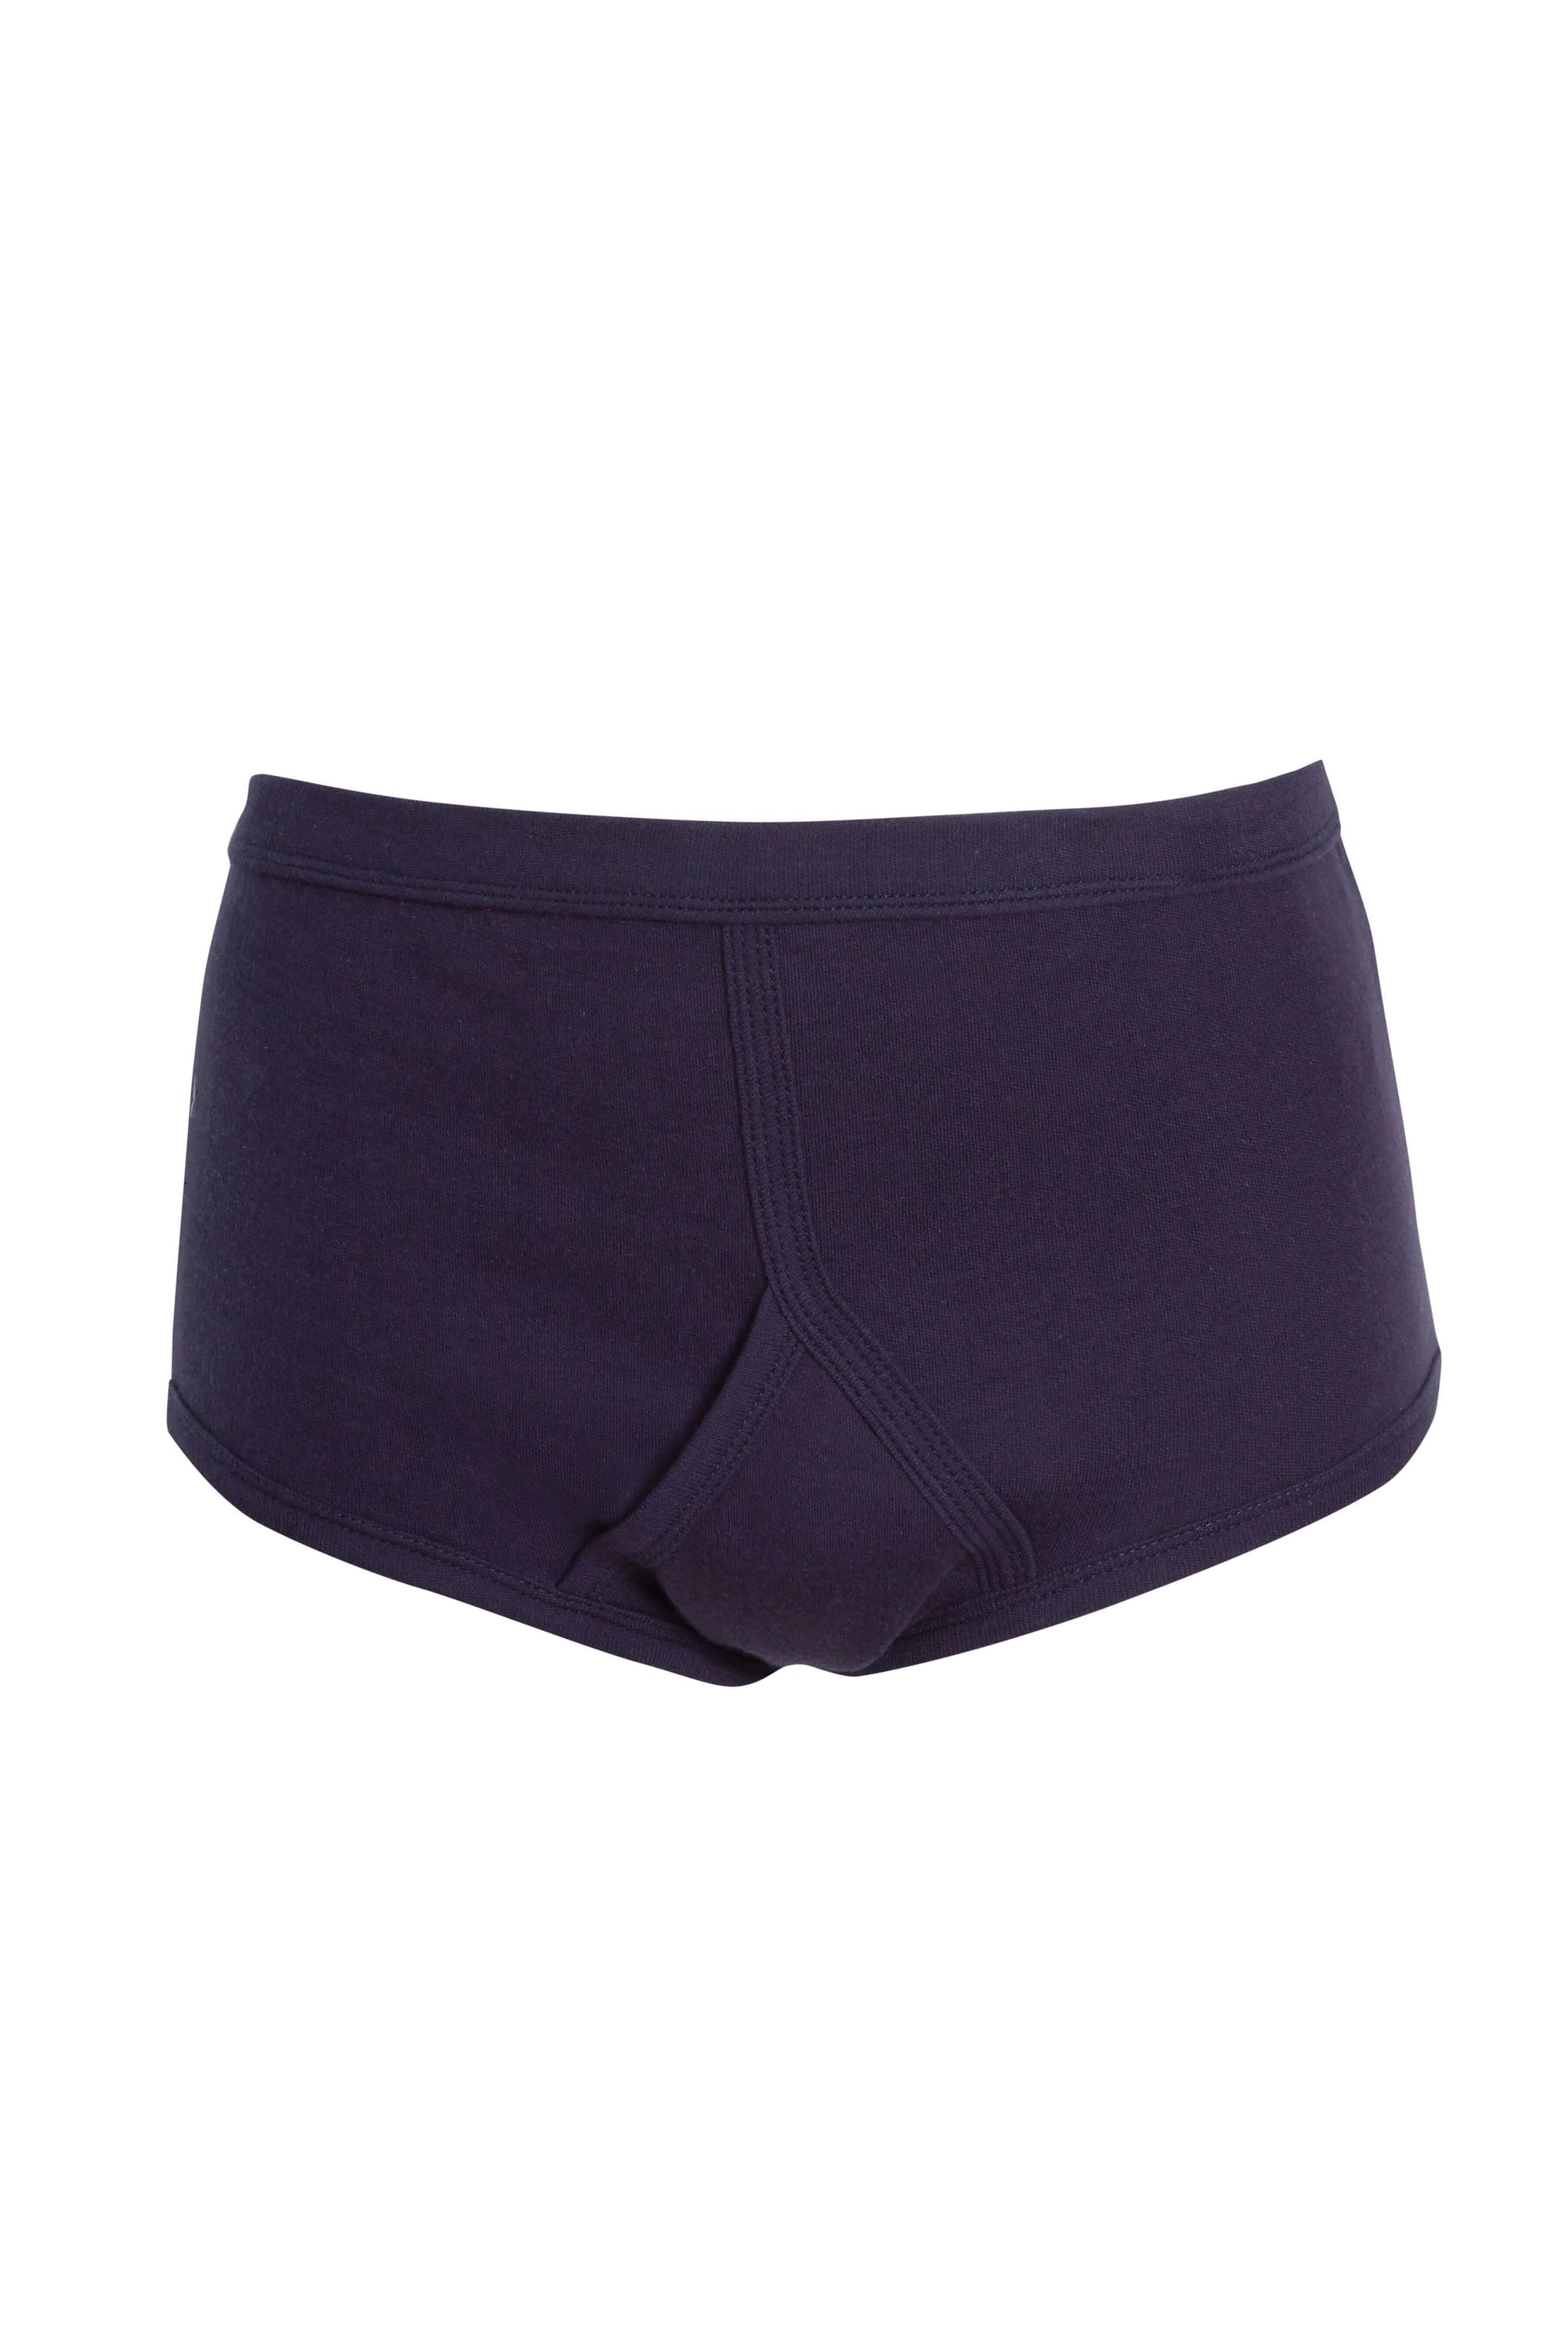 Pack Of 6 Men's Organic Cotton Y Fronts Underpants Sports Underwear. Buy  Now For £13.00.